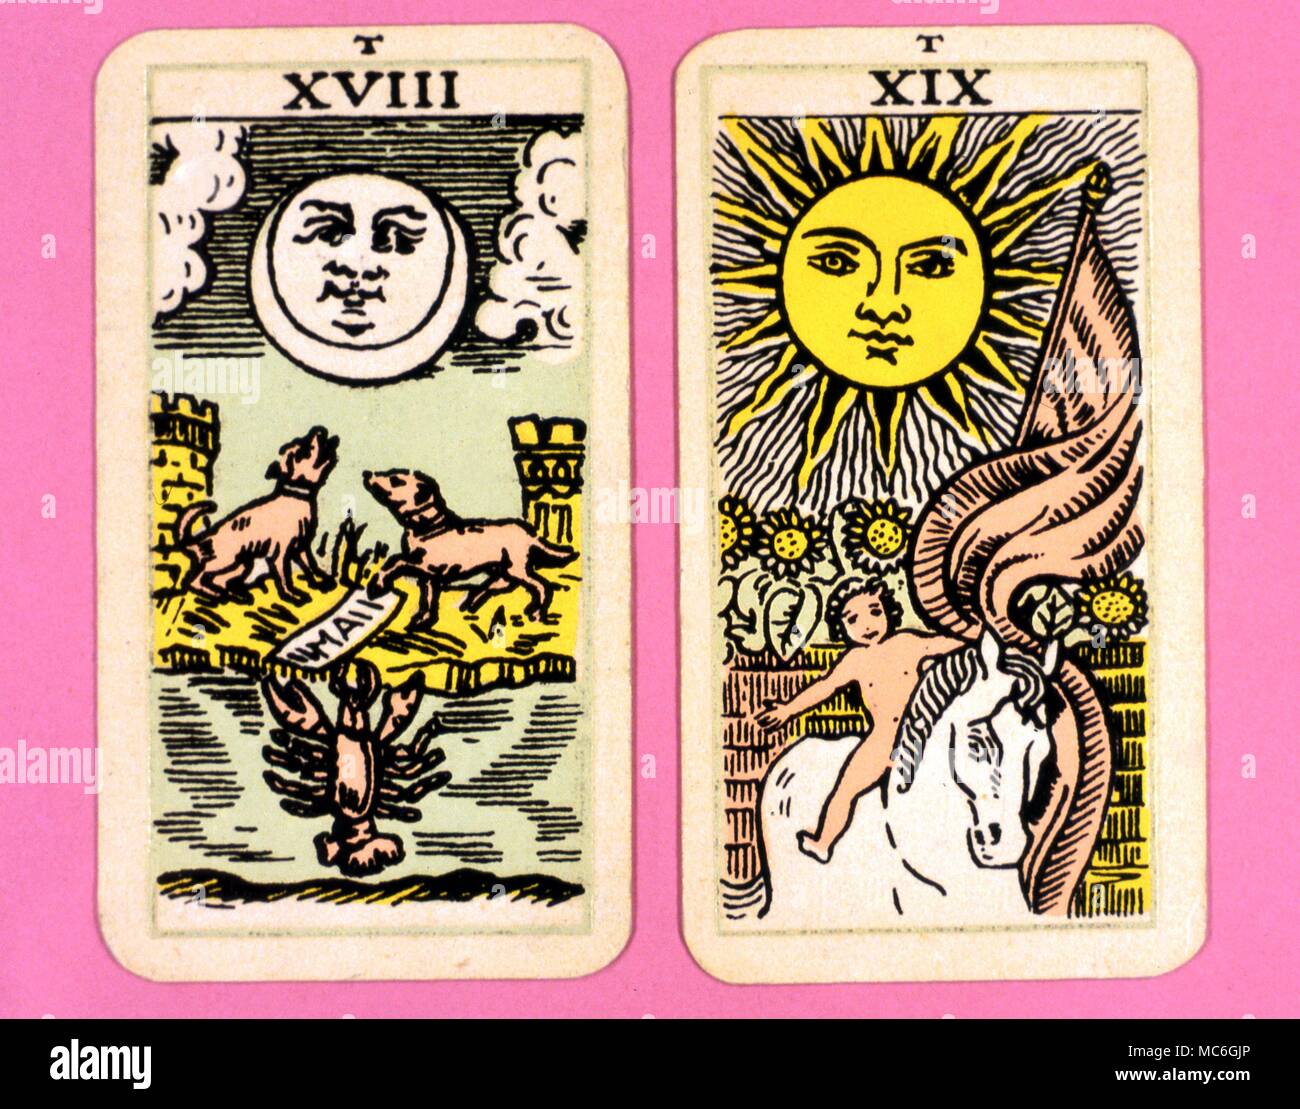 Tarot Cards-Majo Arcana- The Parisian Tarot. Card 18. The Moon, and Card  19. The Sun. Two cards from a Major Arcana picture Tarot, probably designed  in an archaizing style in loose imitation